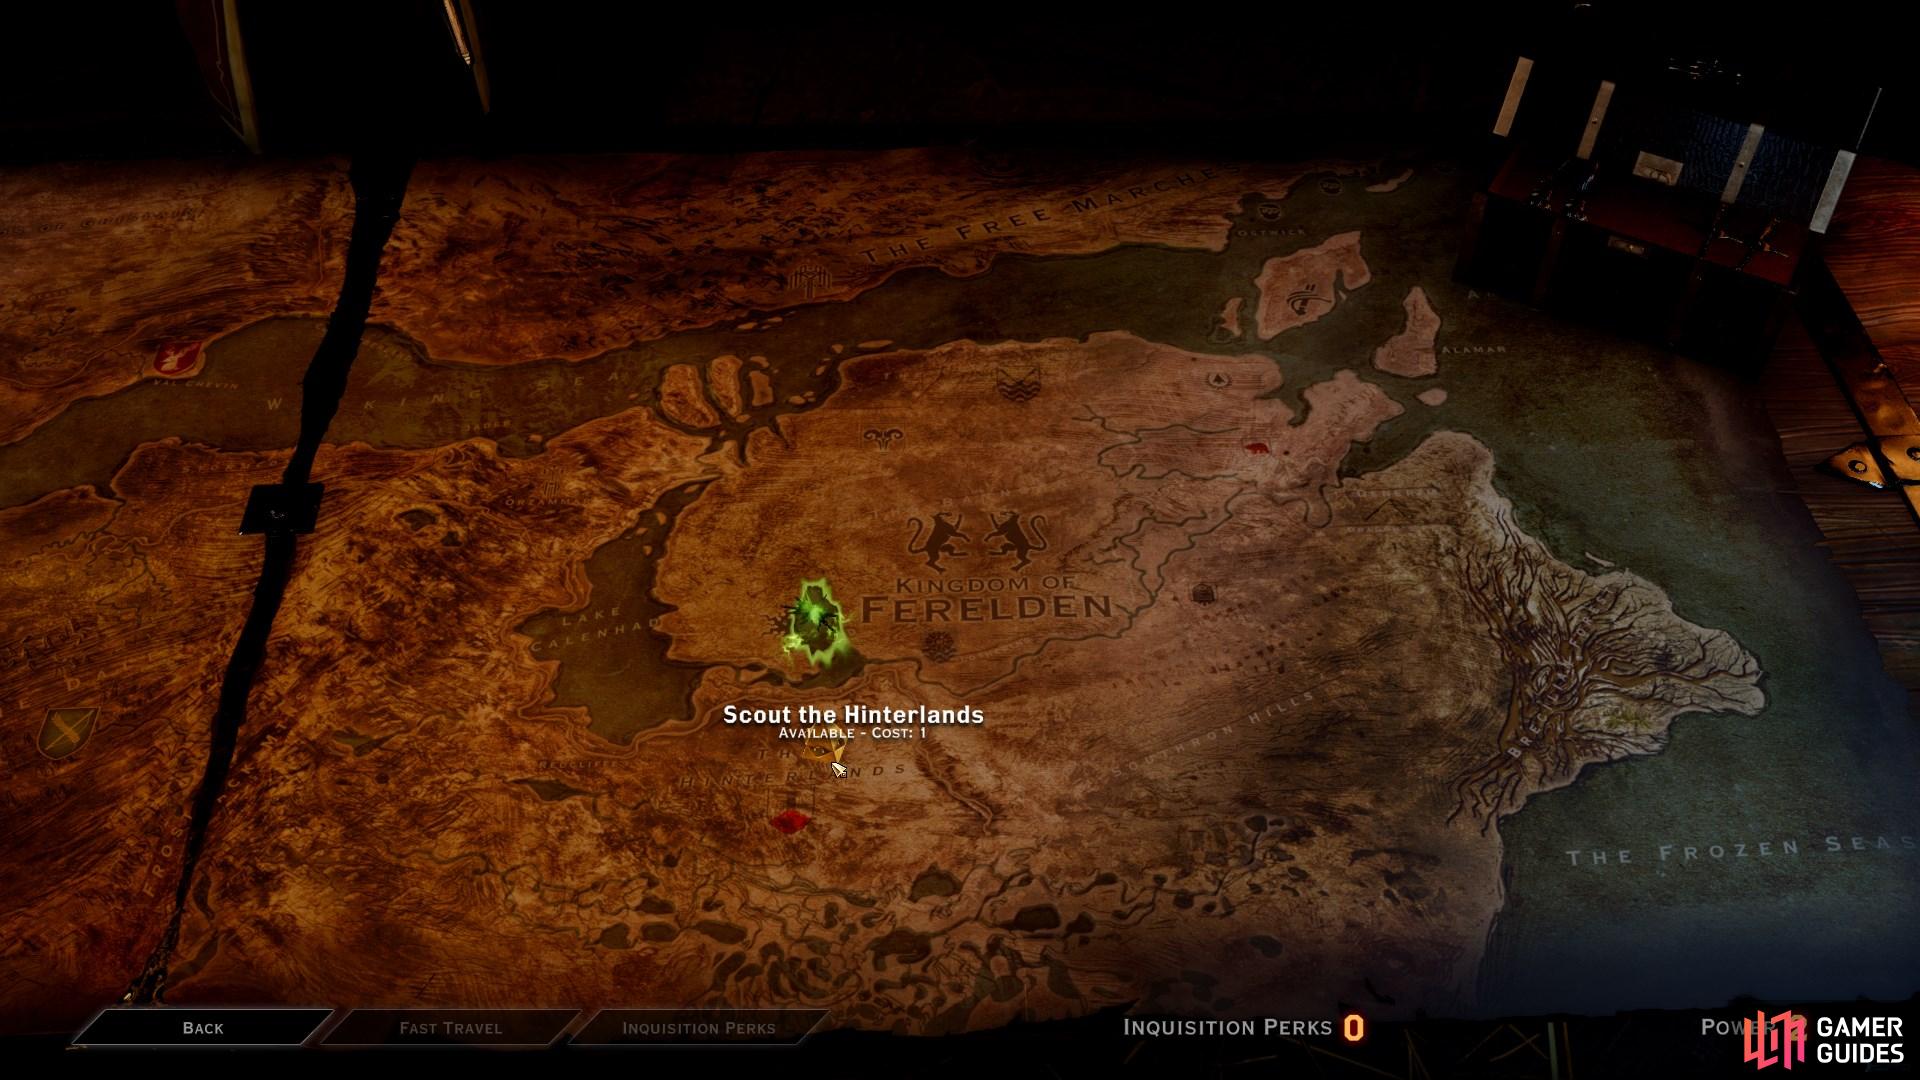 Select 'Scout the Hinterlands' to spend your power point and begin the mission.